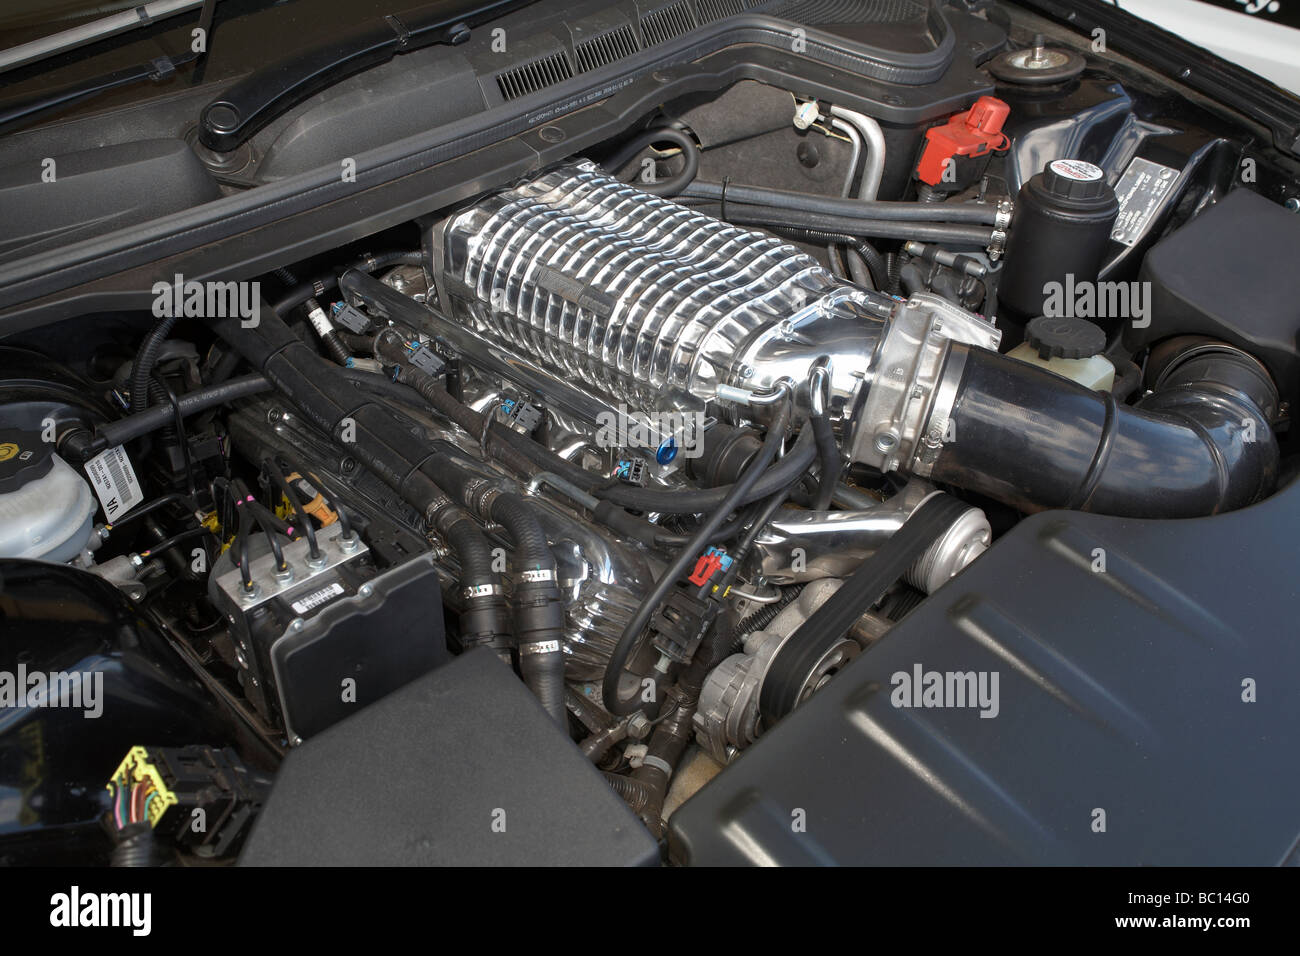 Eaton supercharger mounted to a Chev LS1 V8 engine in an Australian Holden Commodore car Stock Photo